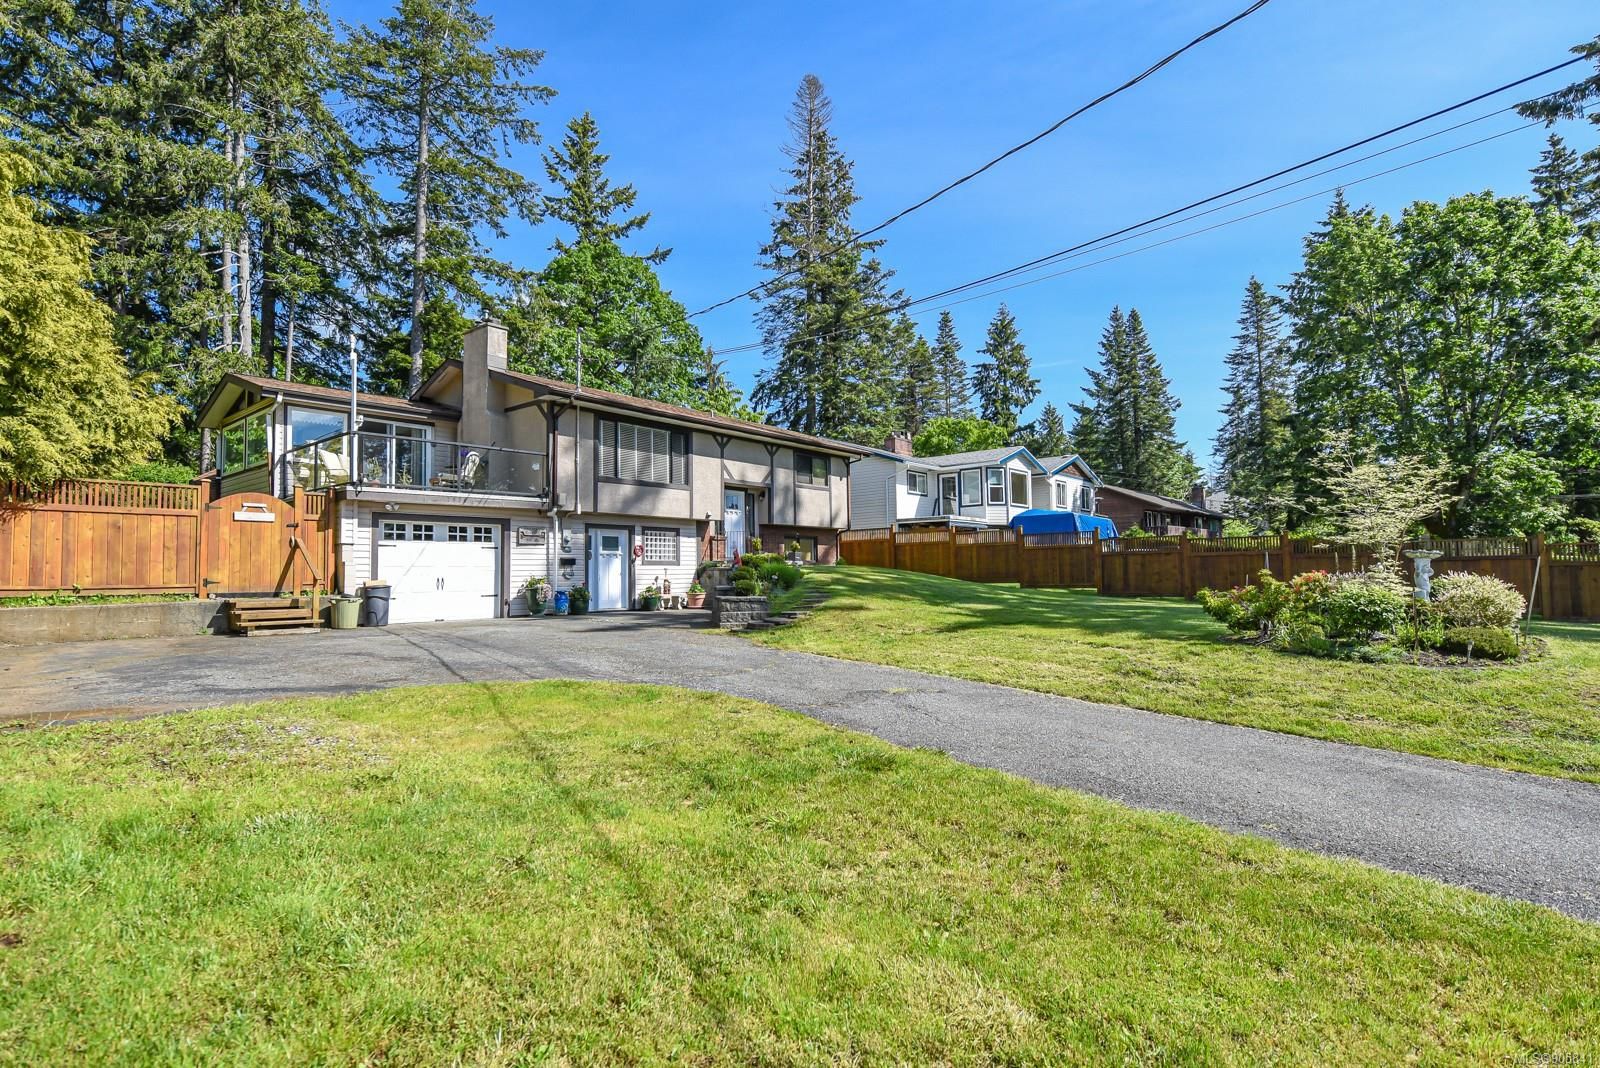 I have sold a property at 2924 Suffield Rd in Courtenay
